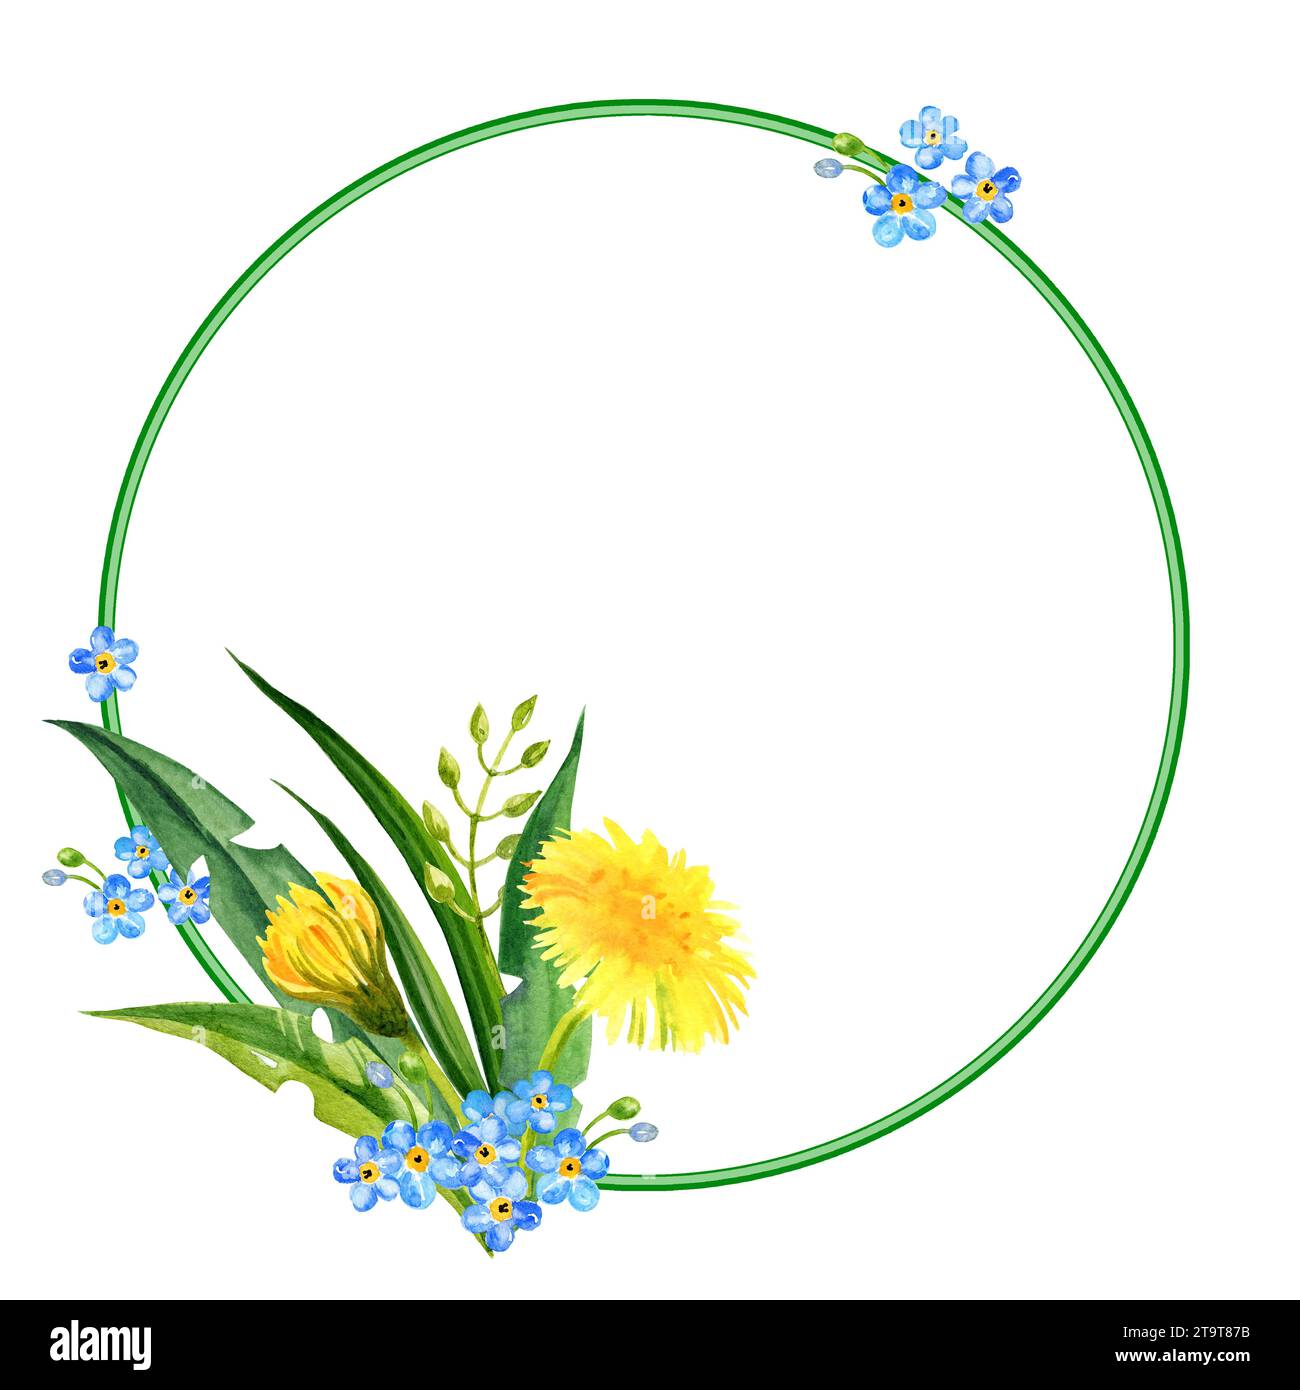 watercolor round frame with summer yellow flowers blow ball, hand draw dandelions, forget me not flowers and leaves, herbs, sketch of spring yellow fl Stock Photo